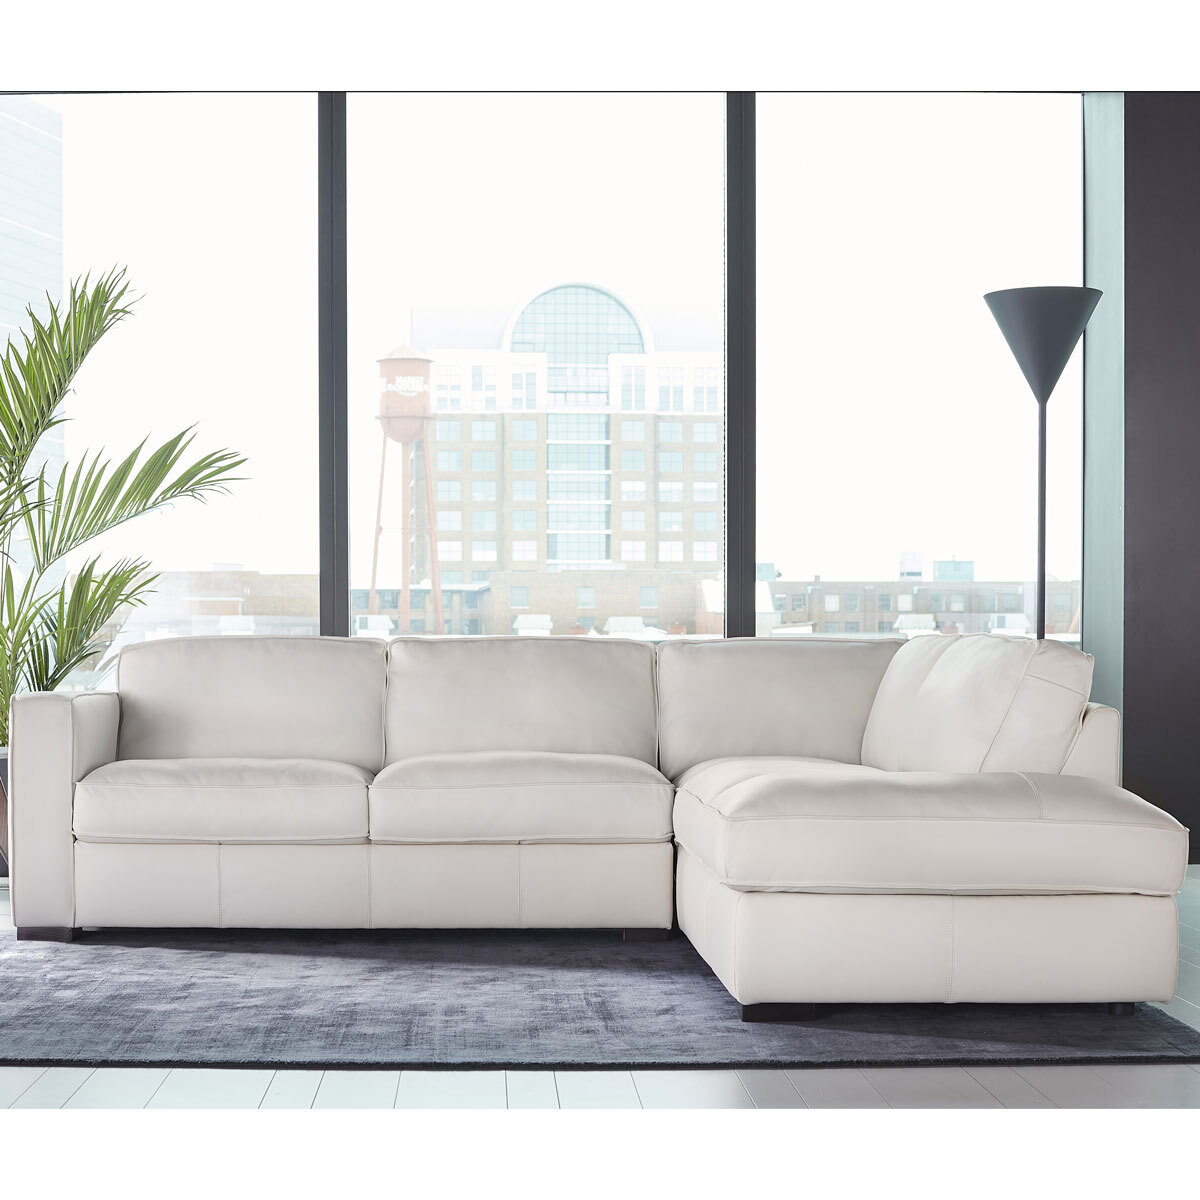 Natuzzigroup Cream Leather Sectional, Leather Couch Cream